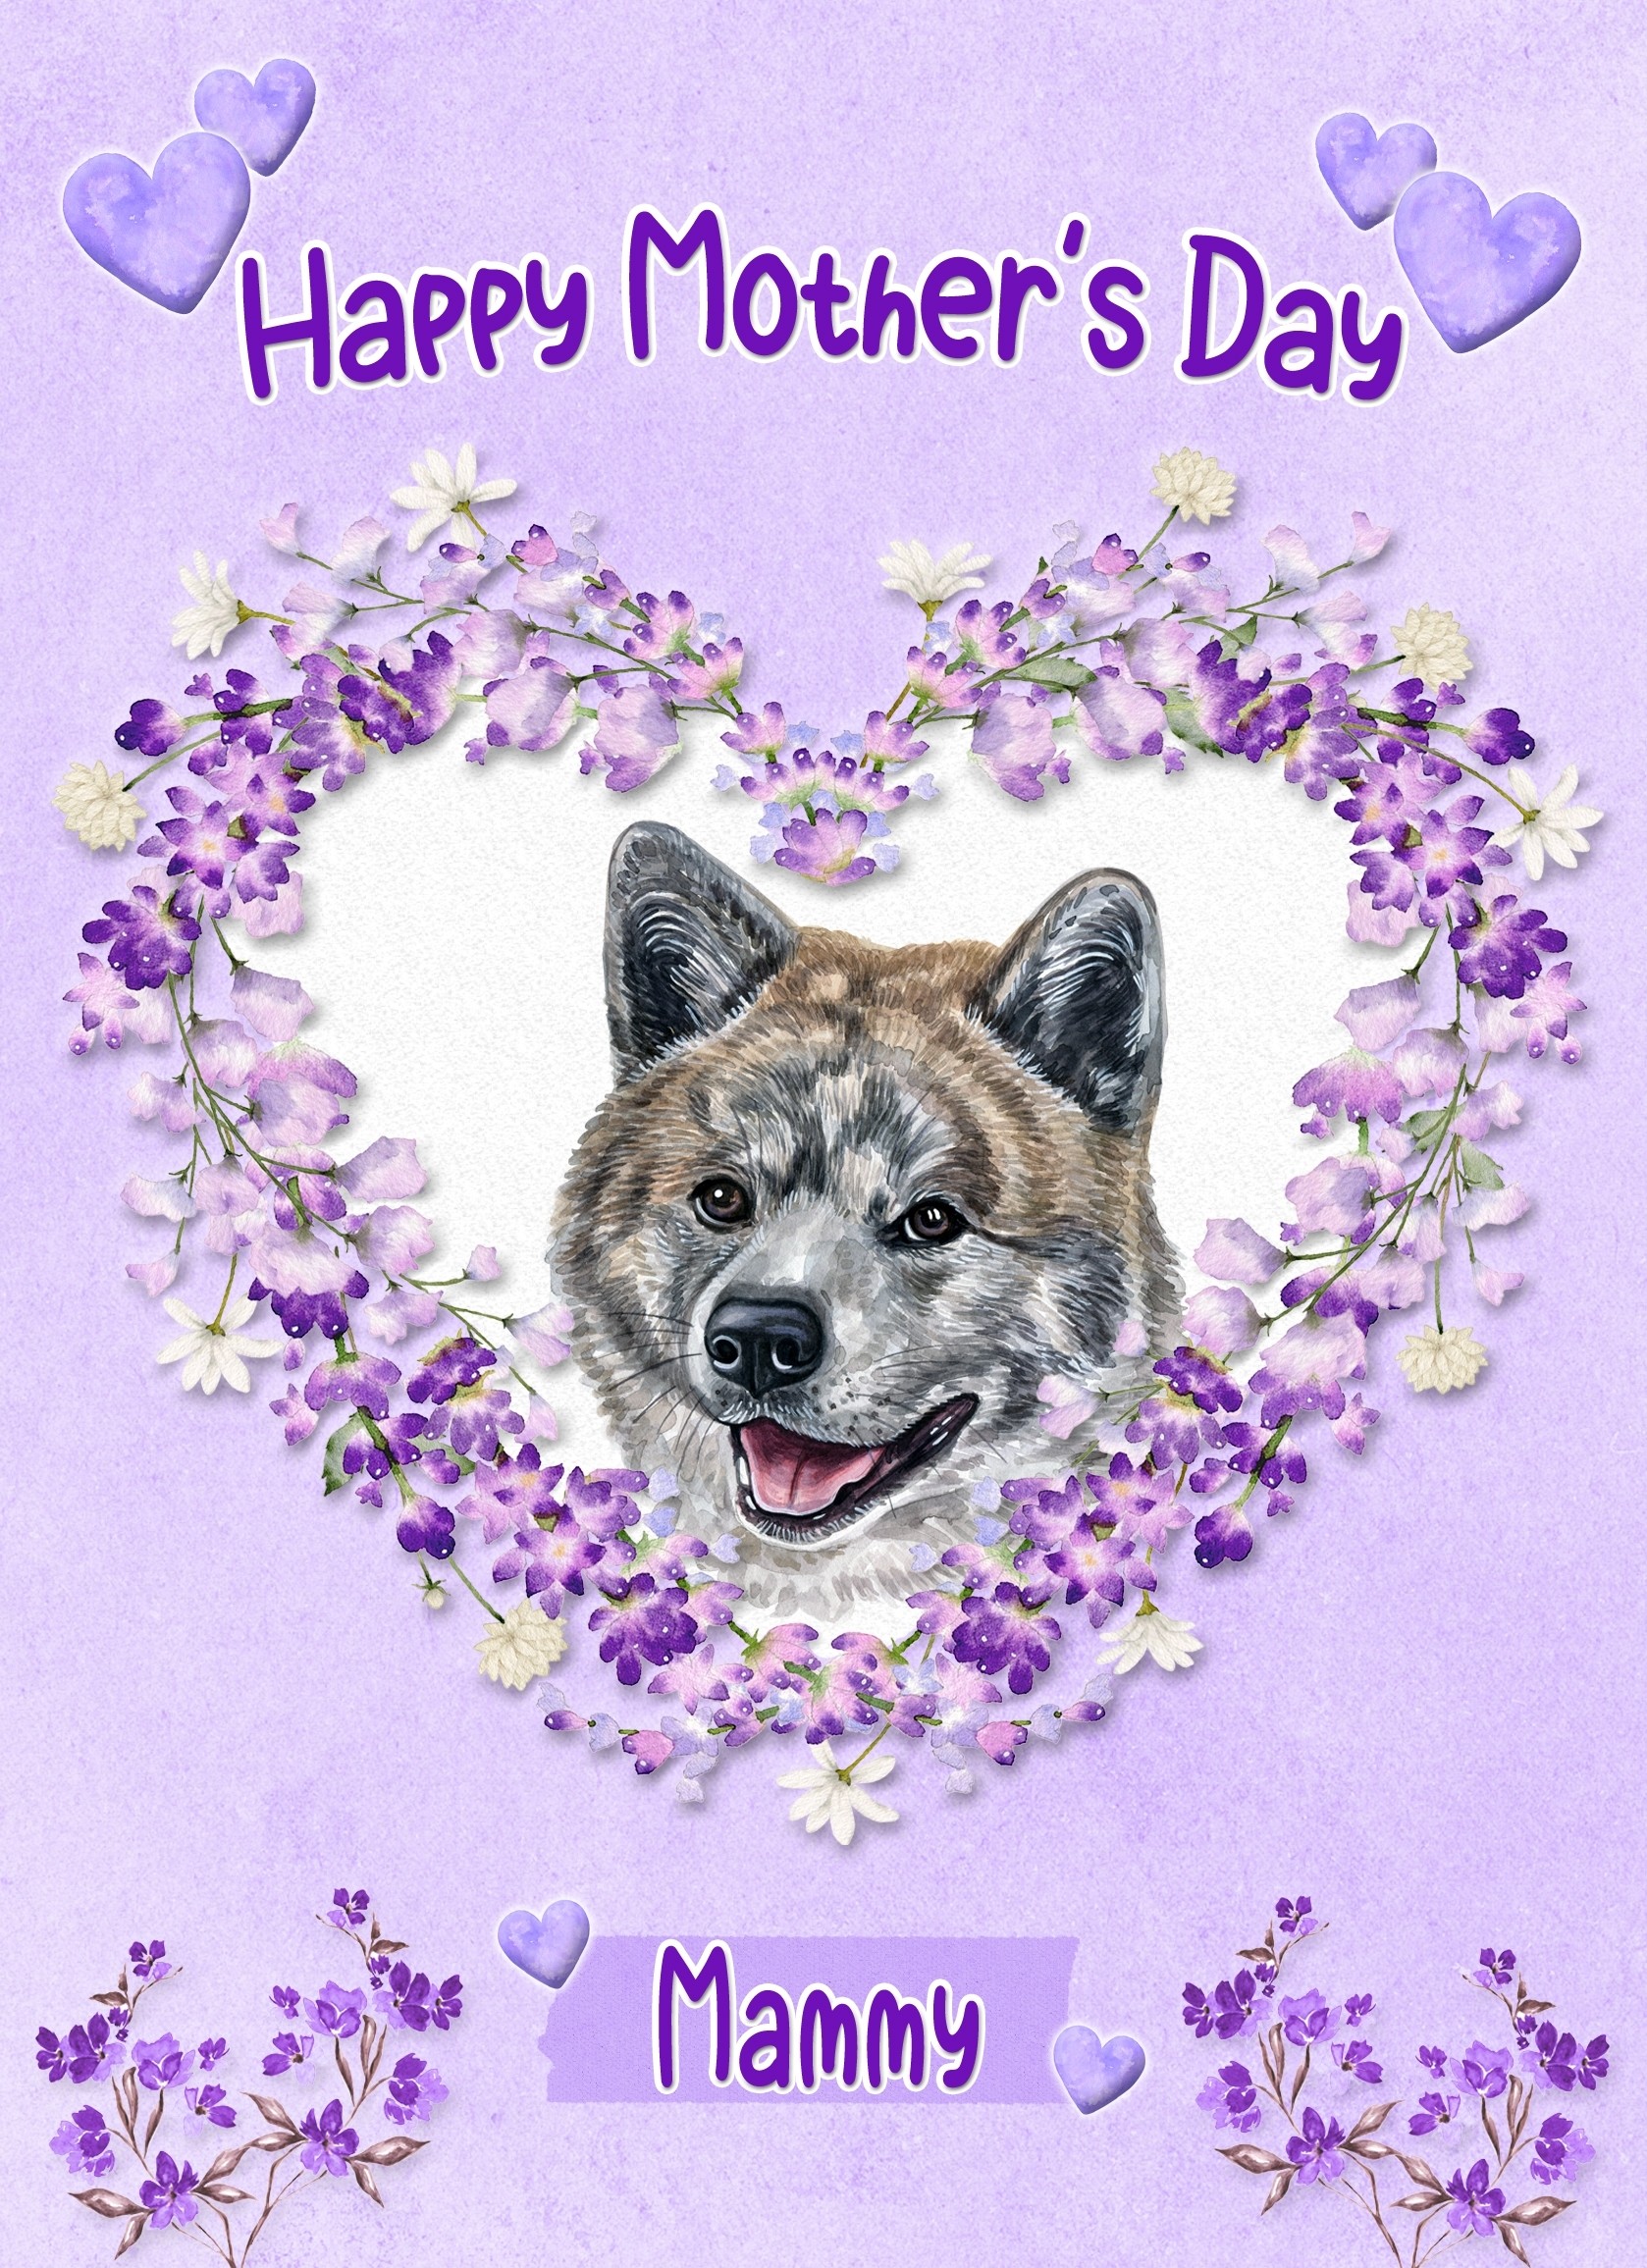 Akita Dog Mothers Day Card (Happy Mothers, Mammy)